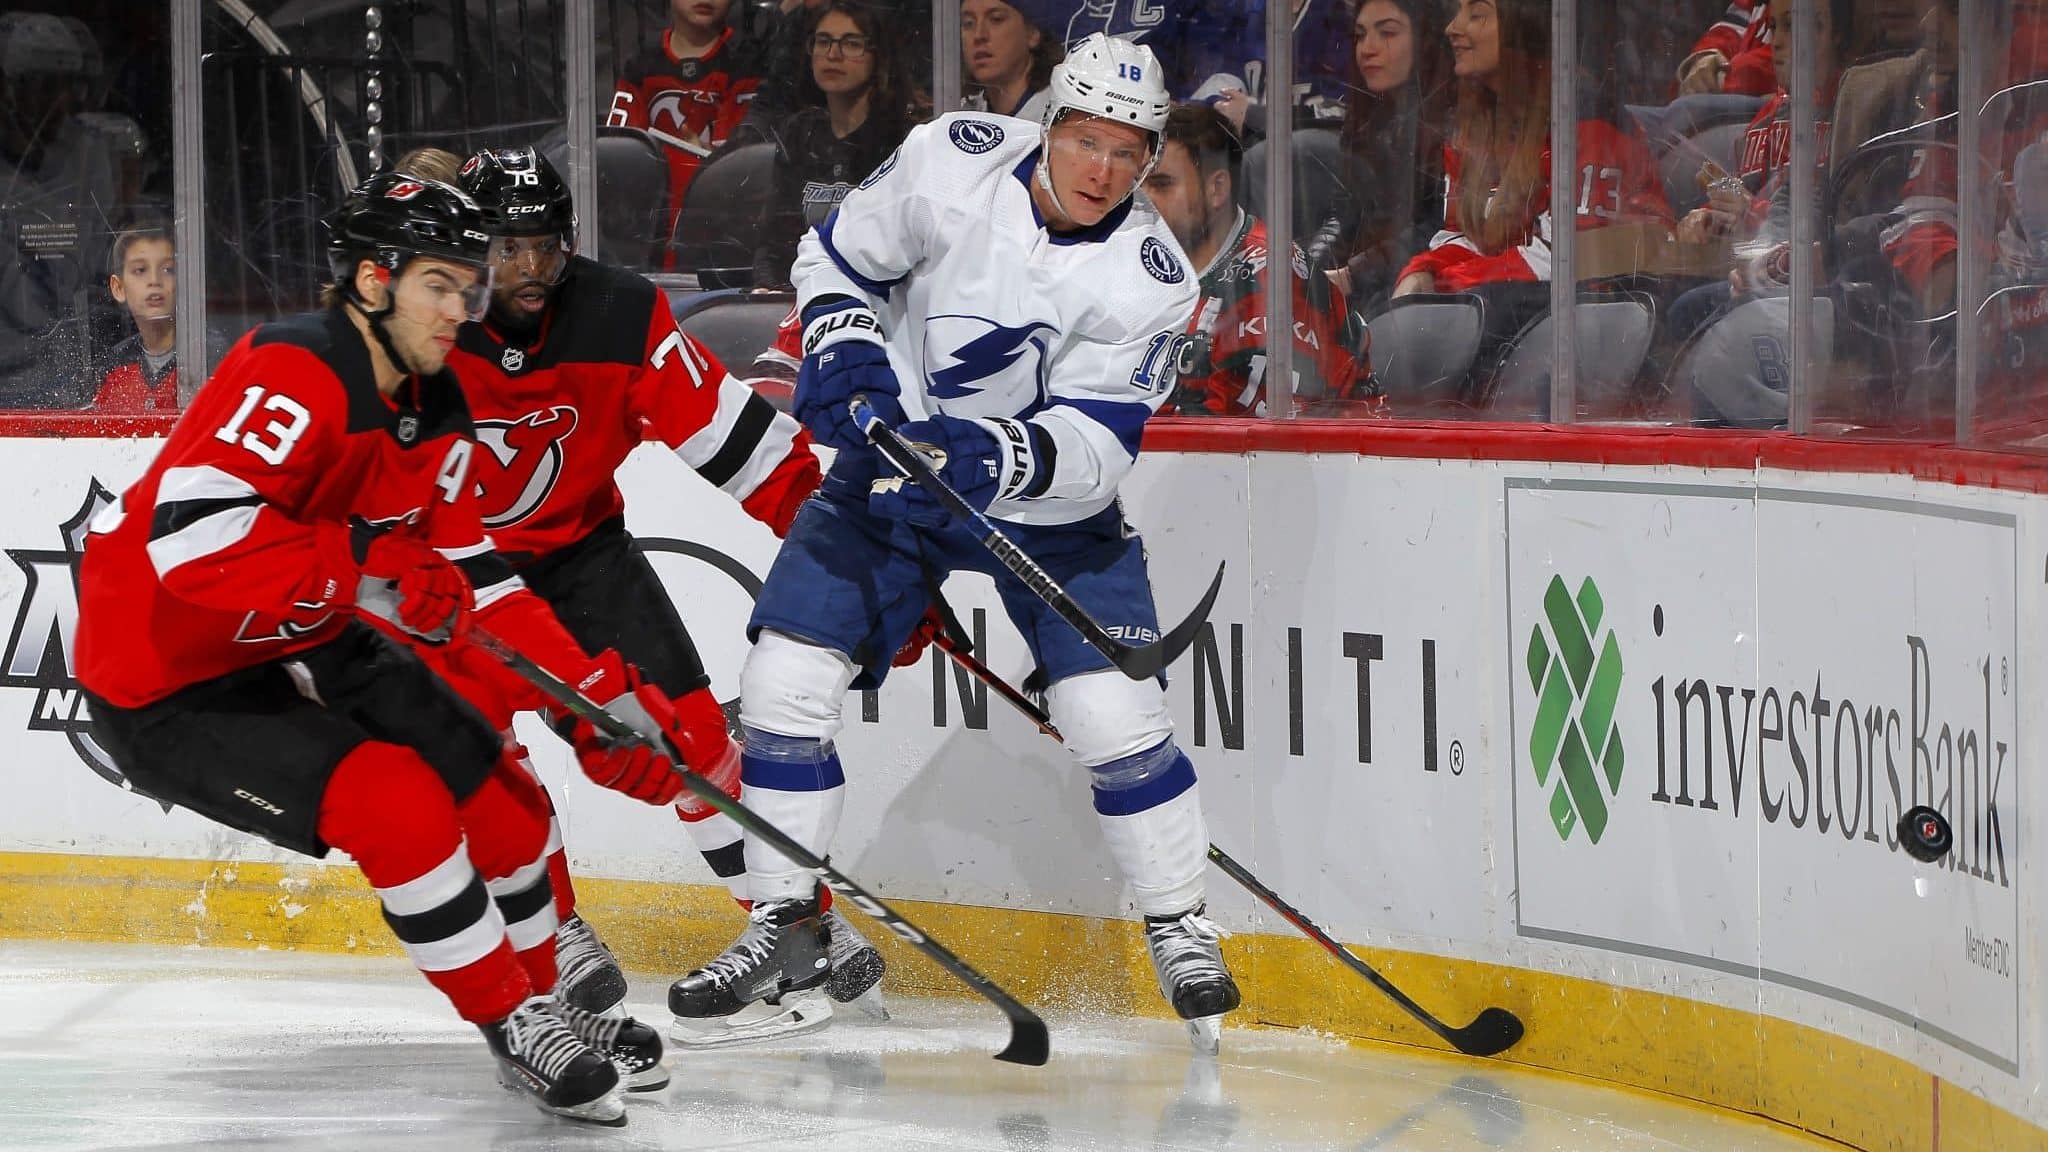 NEWARK, NEW JERSEY - JANUARY 12: Ondrej Palat #18 of the Tampa Bay Lightning clears the puck away from Nico Hischier #13 and P.K. Subban #76 of the New Jersey Devils during the first period at Prudential Center on January 12, 2020 in Newark, New Jersey.